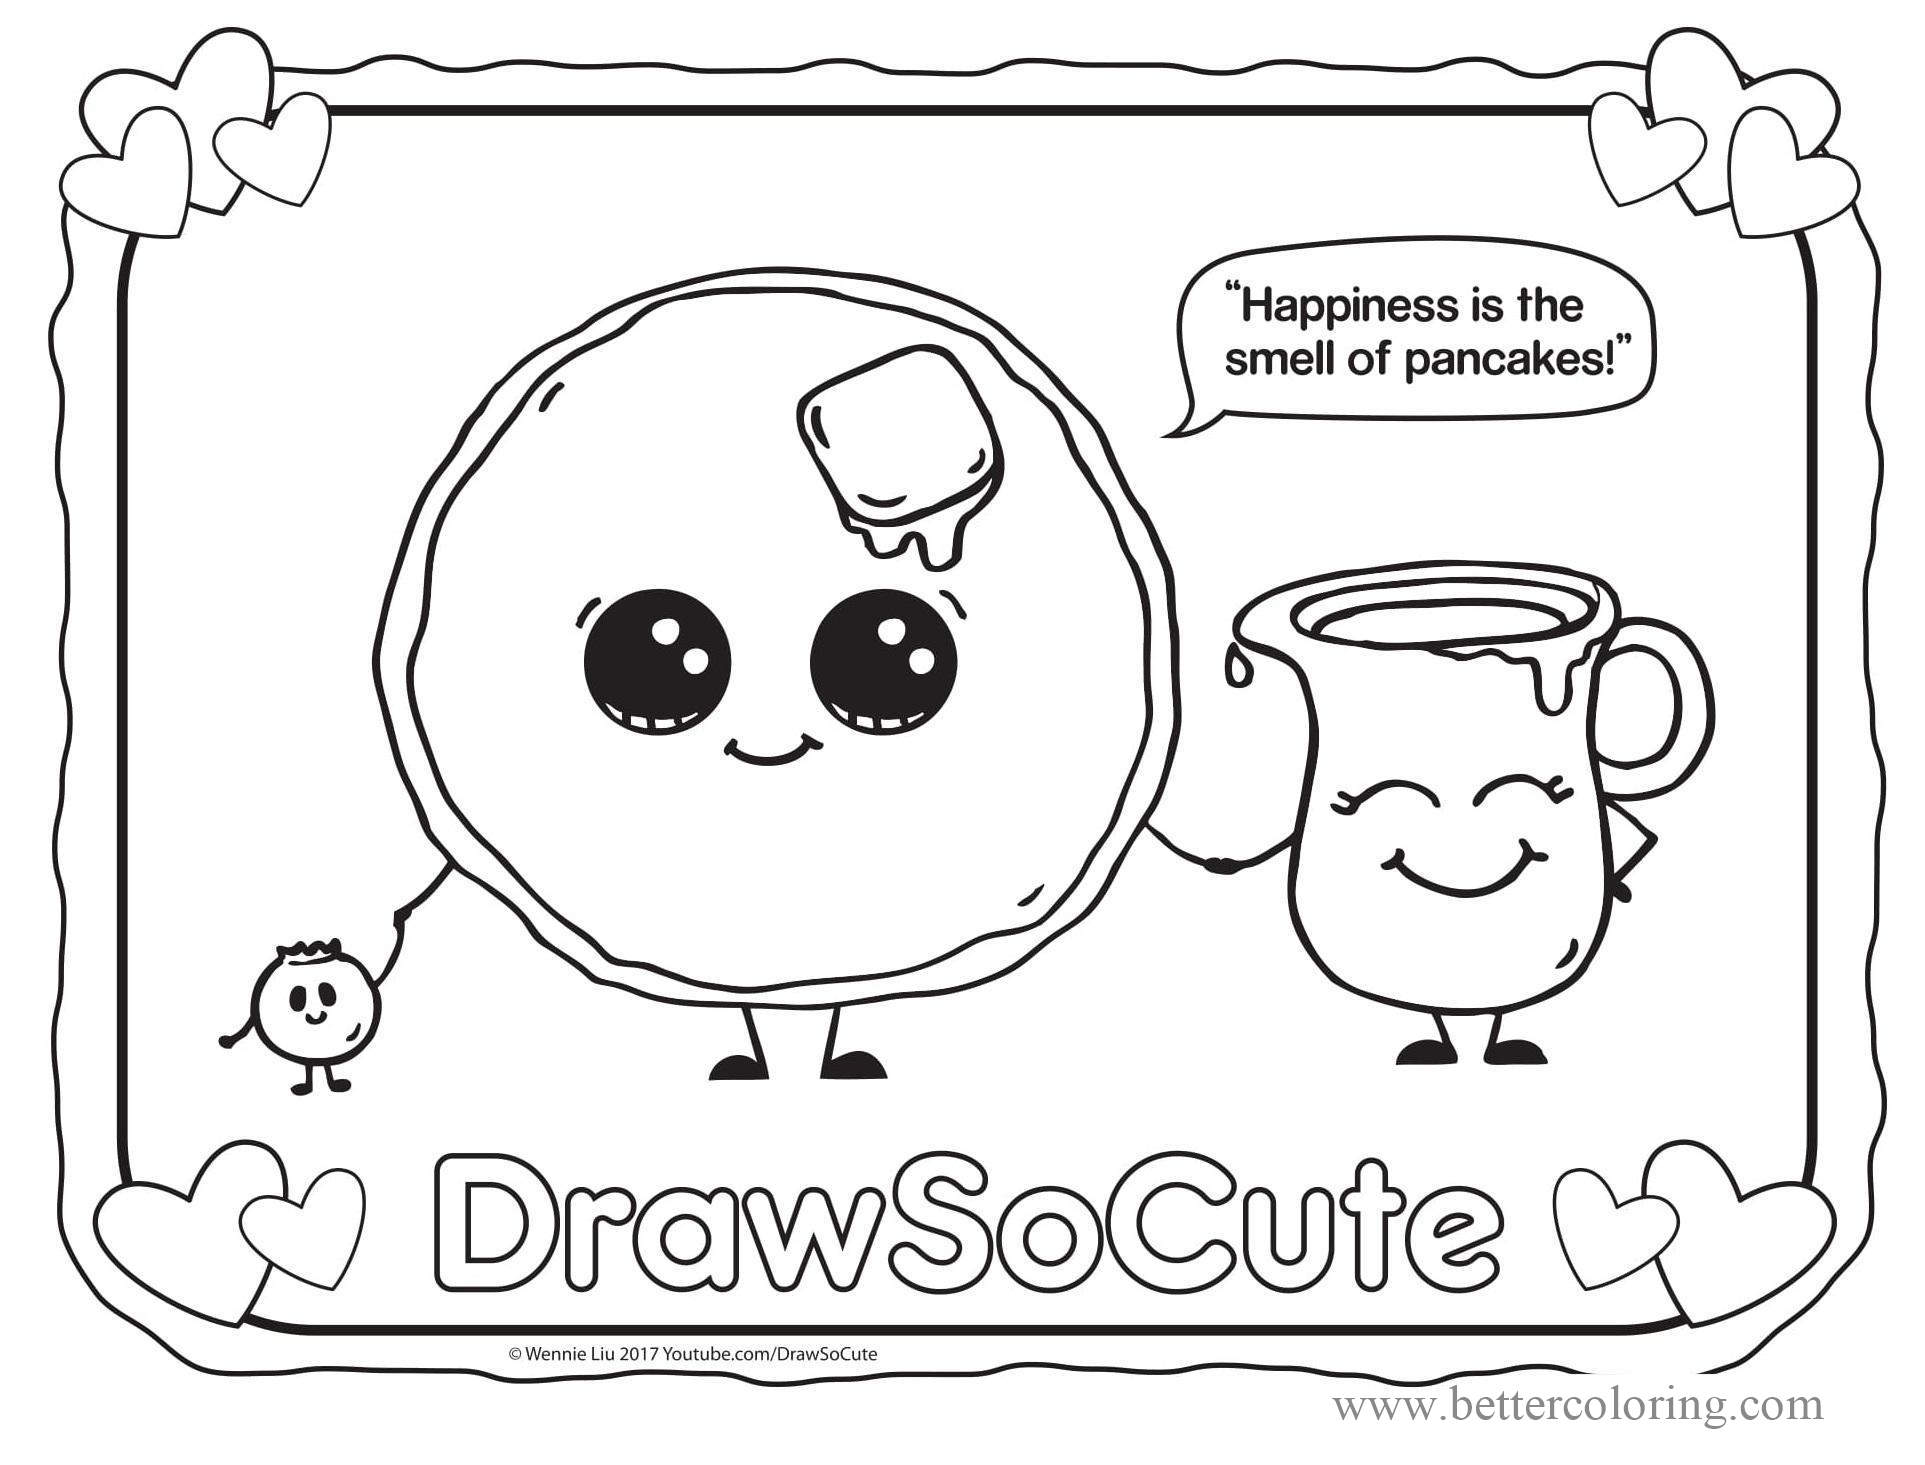 Draw So Cute Pancake Coloring Pages - Free Printable Coloring Pages